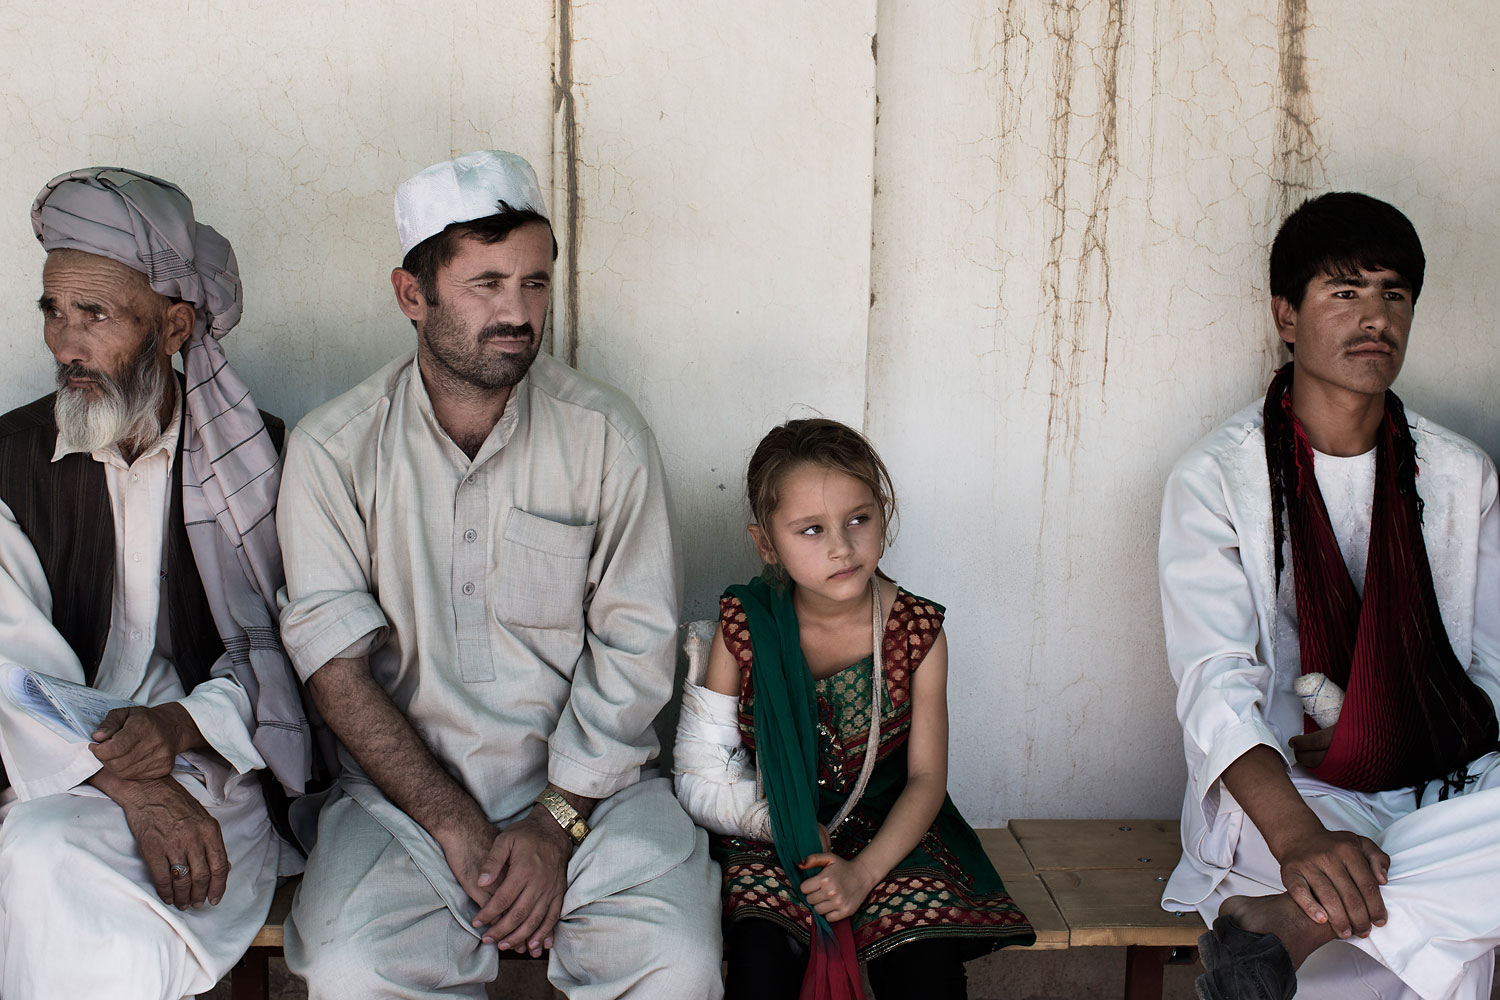 OPD patients wait for appointments outside at the Kunduz Trauma Centre in Kunduz, Northern Afghanistan.